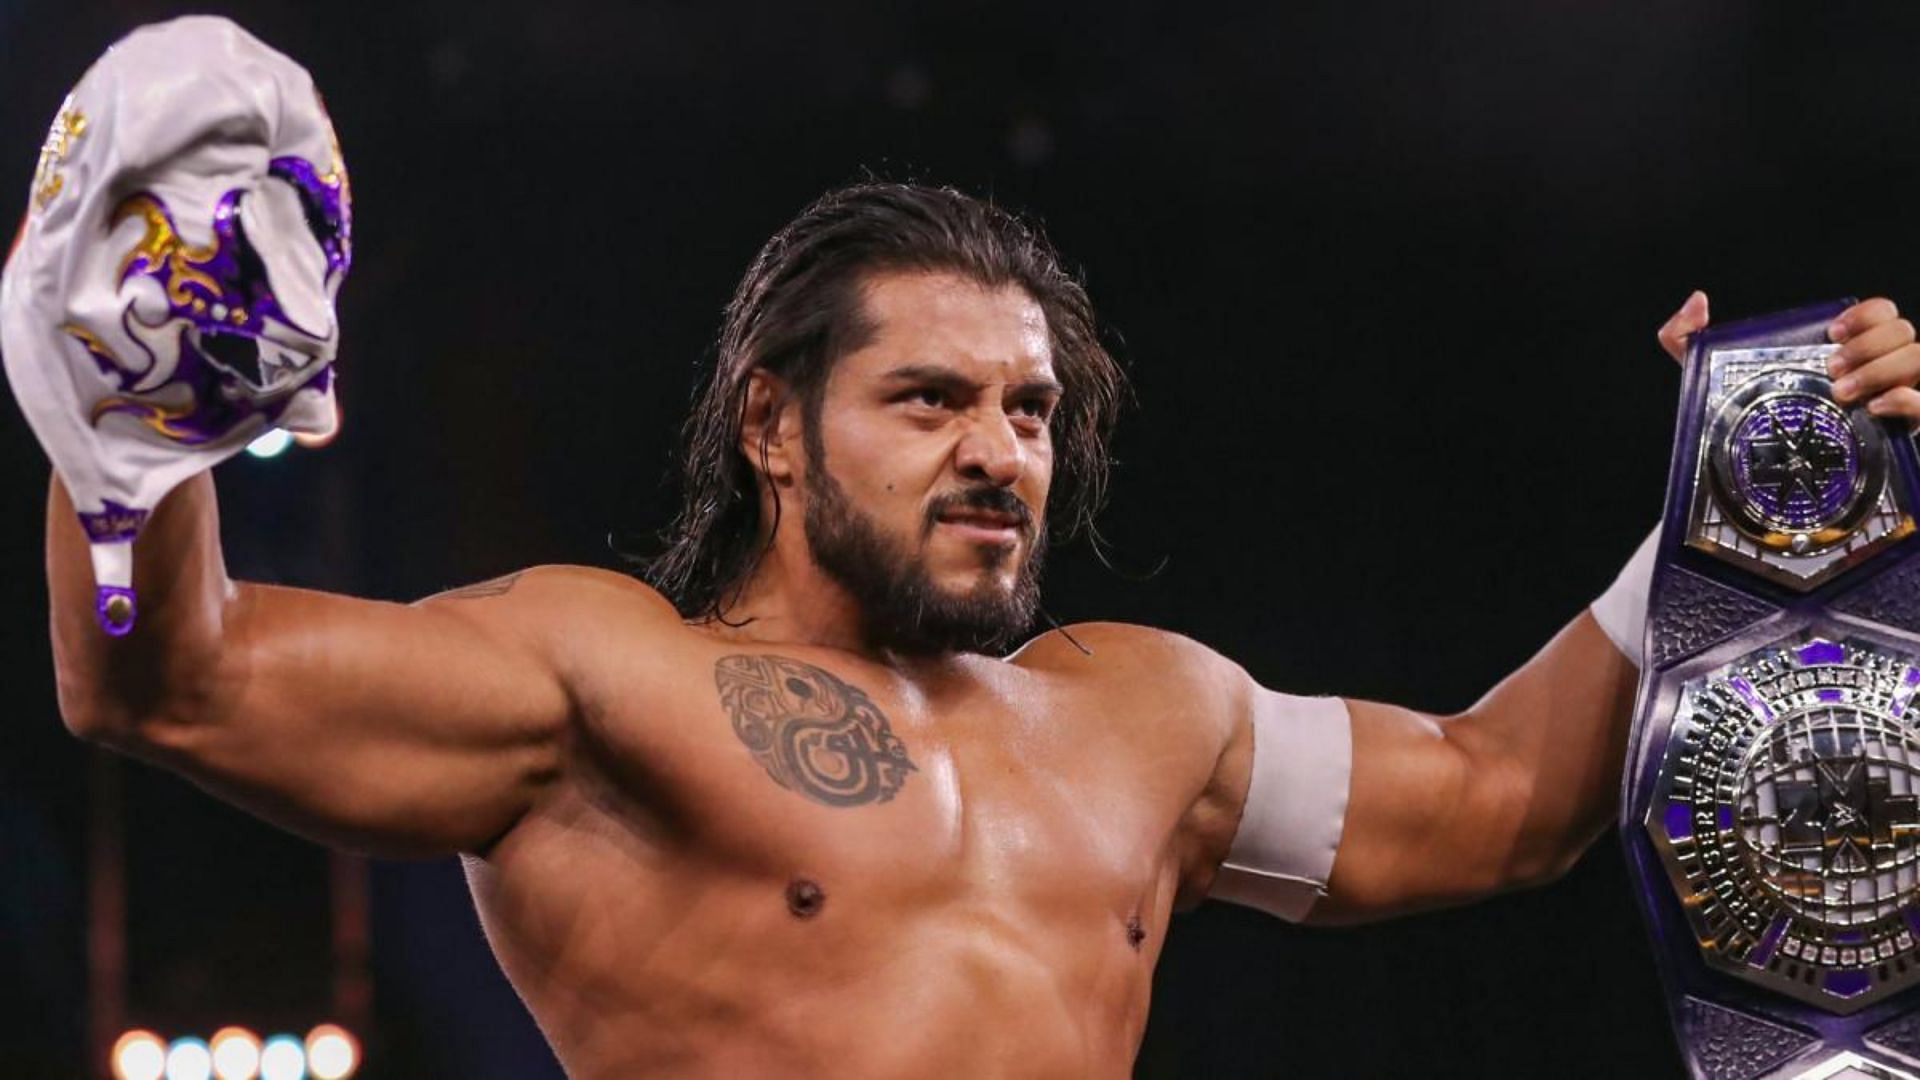 Santos Escobar has given his thoughts on WWE retiring the Cruiserweight Title.